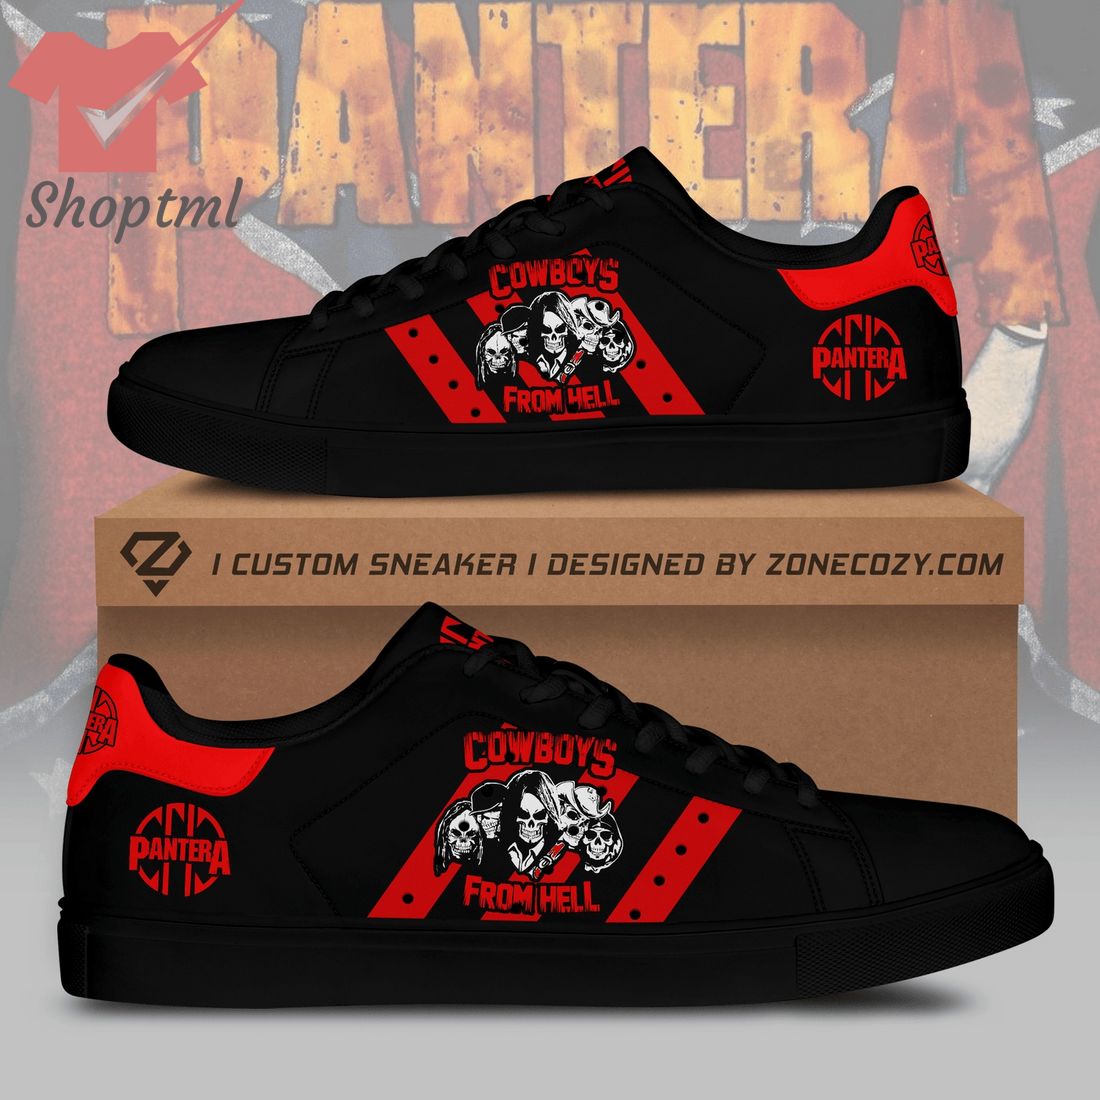 Pantera cowboys from hell stan smith adidas shoes